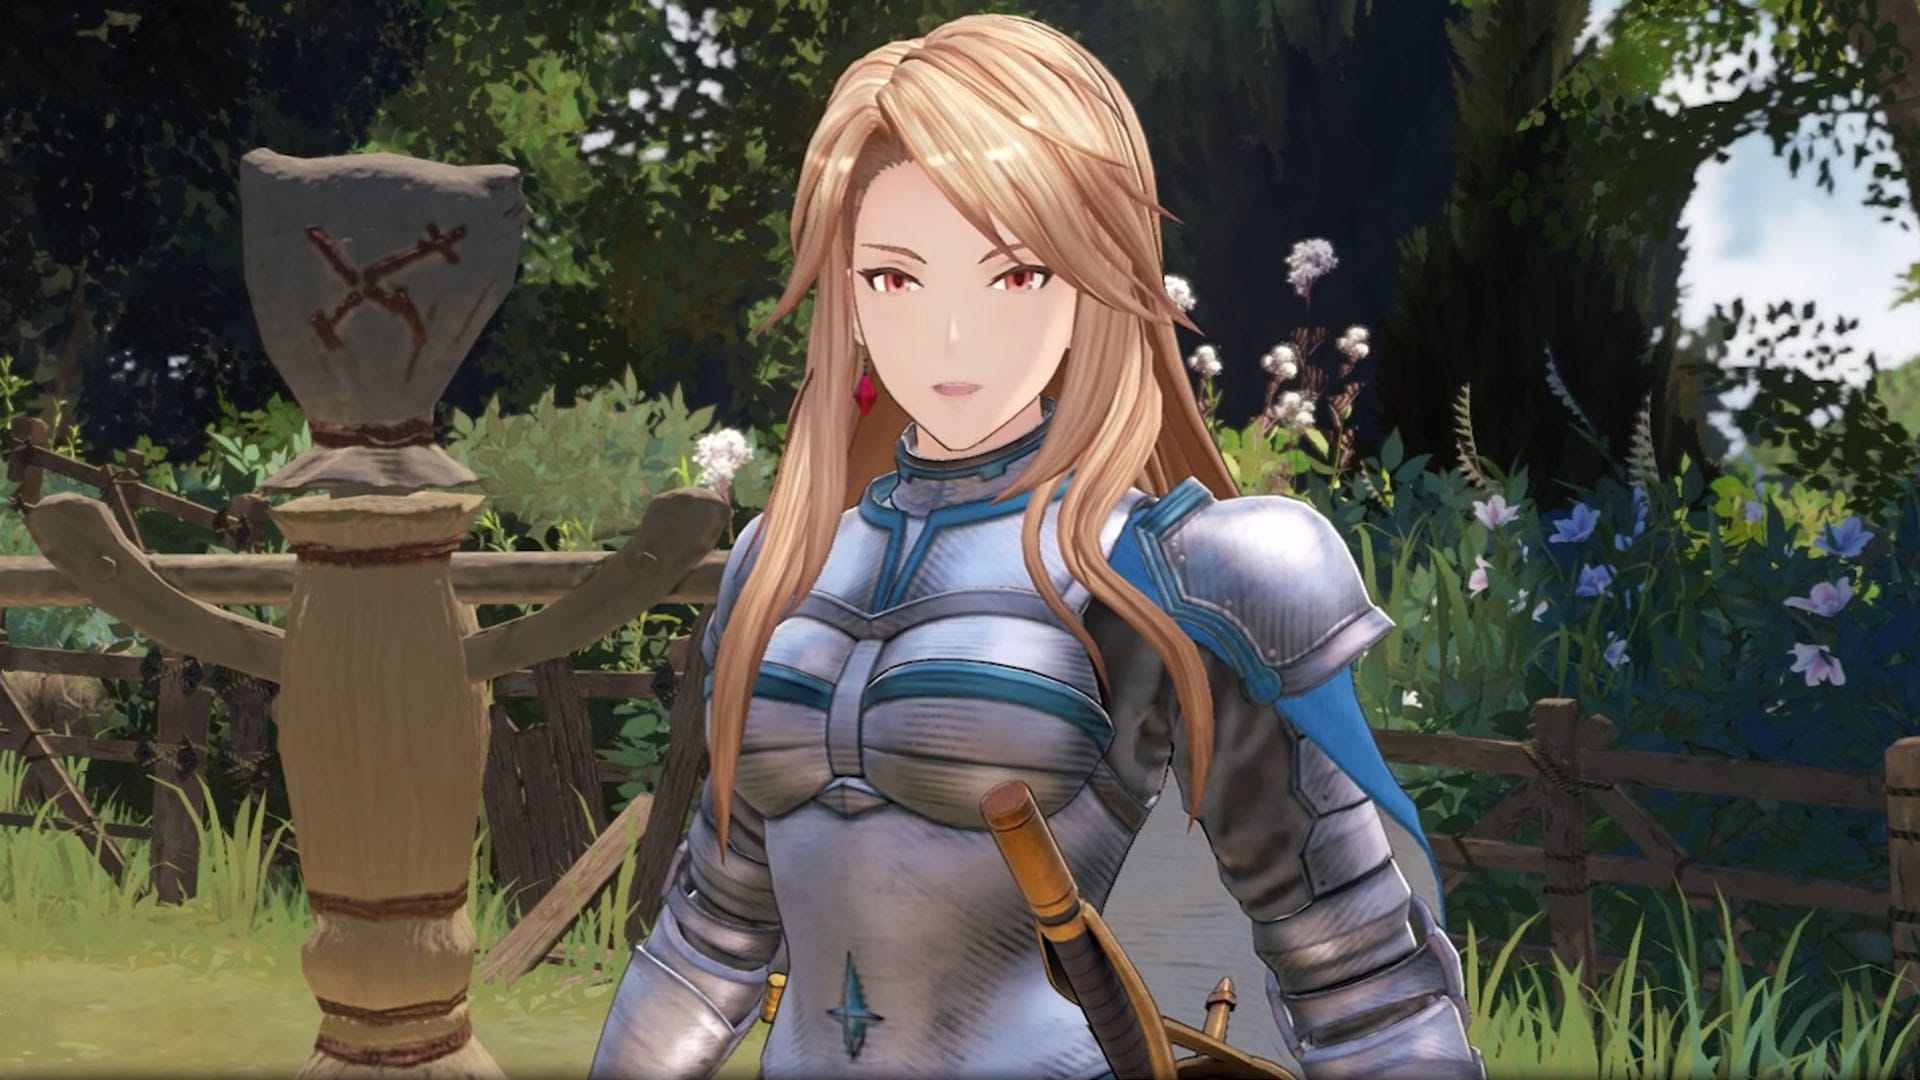 Granblue Fantasy: Relink game release date, news & gameplay